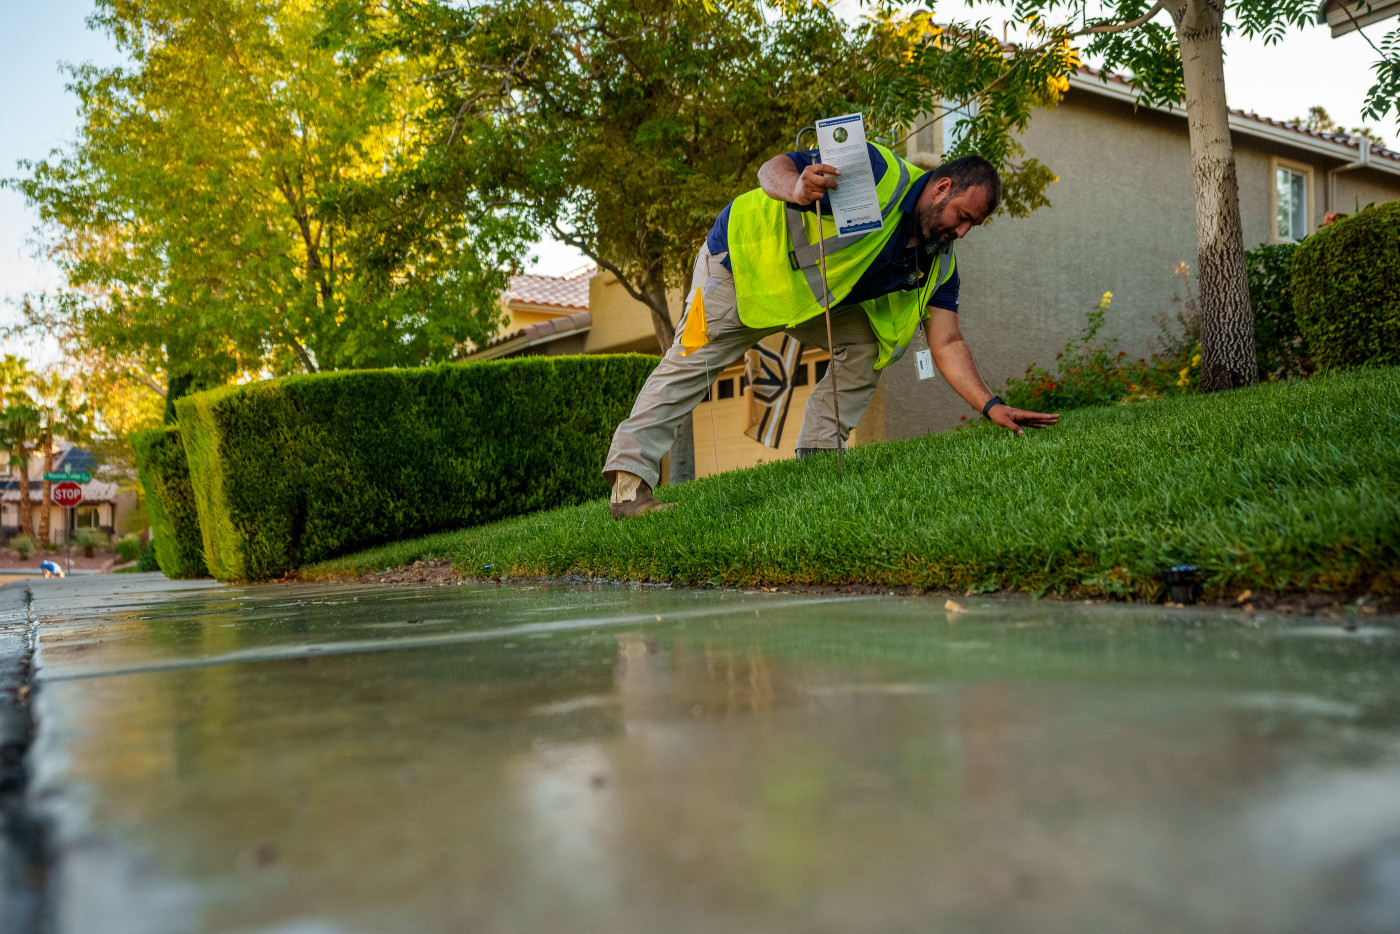 (Trent Nelson | The Salt Lake Tribune) Salvador Polanco-Gamez, a conservation aide with the Las Vegas Valley Water District, documents a leak in a sprinkler system in Summerlin, a community in the Las Vegas Valley, Nevada on Thursday, Sept. 29, 2022.